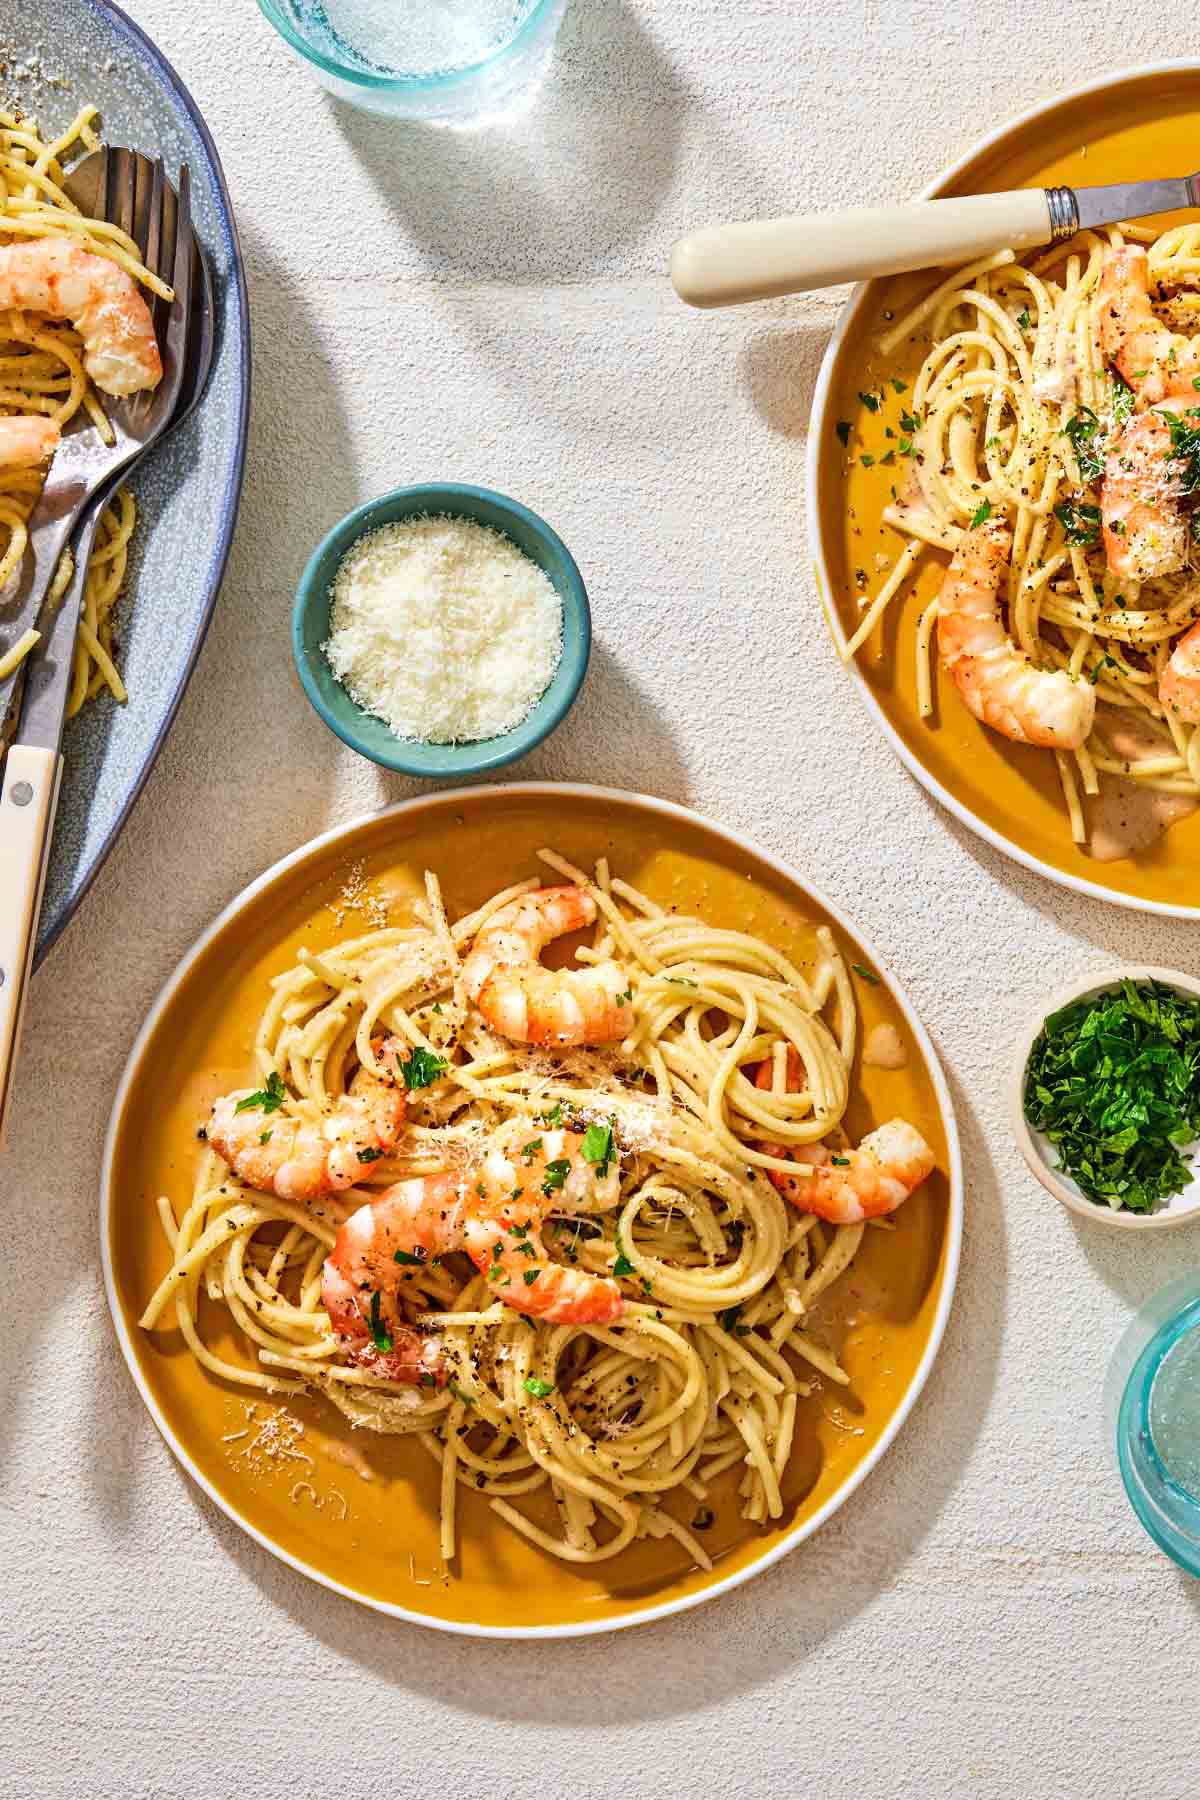 An overhead photo of two plates of cacio e pepe, one with a fork. Next to these is a platter with the rest of the shrimp cacio e pepe and serving utensils, small bowls of grated pecorino romano cheese and parsley, and two glasses of water.